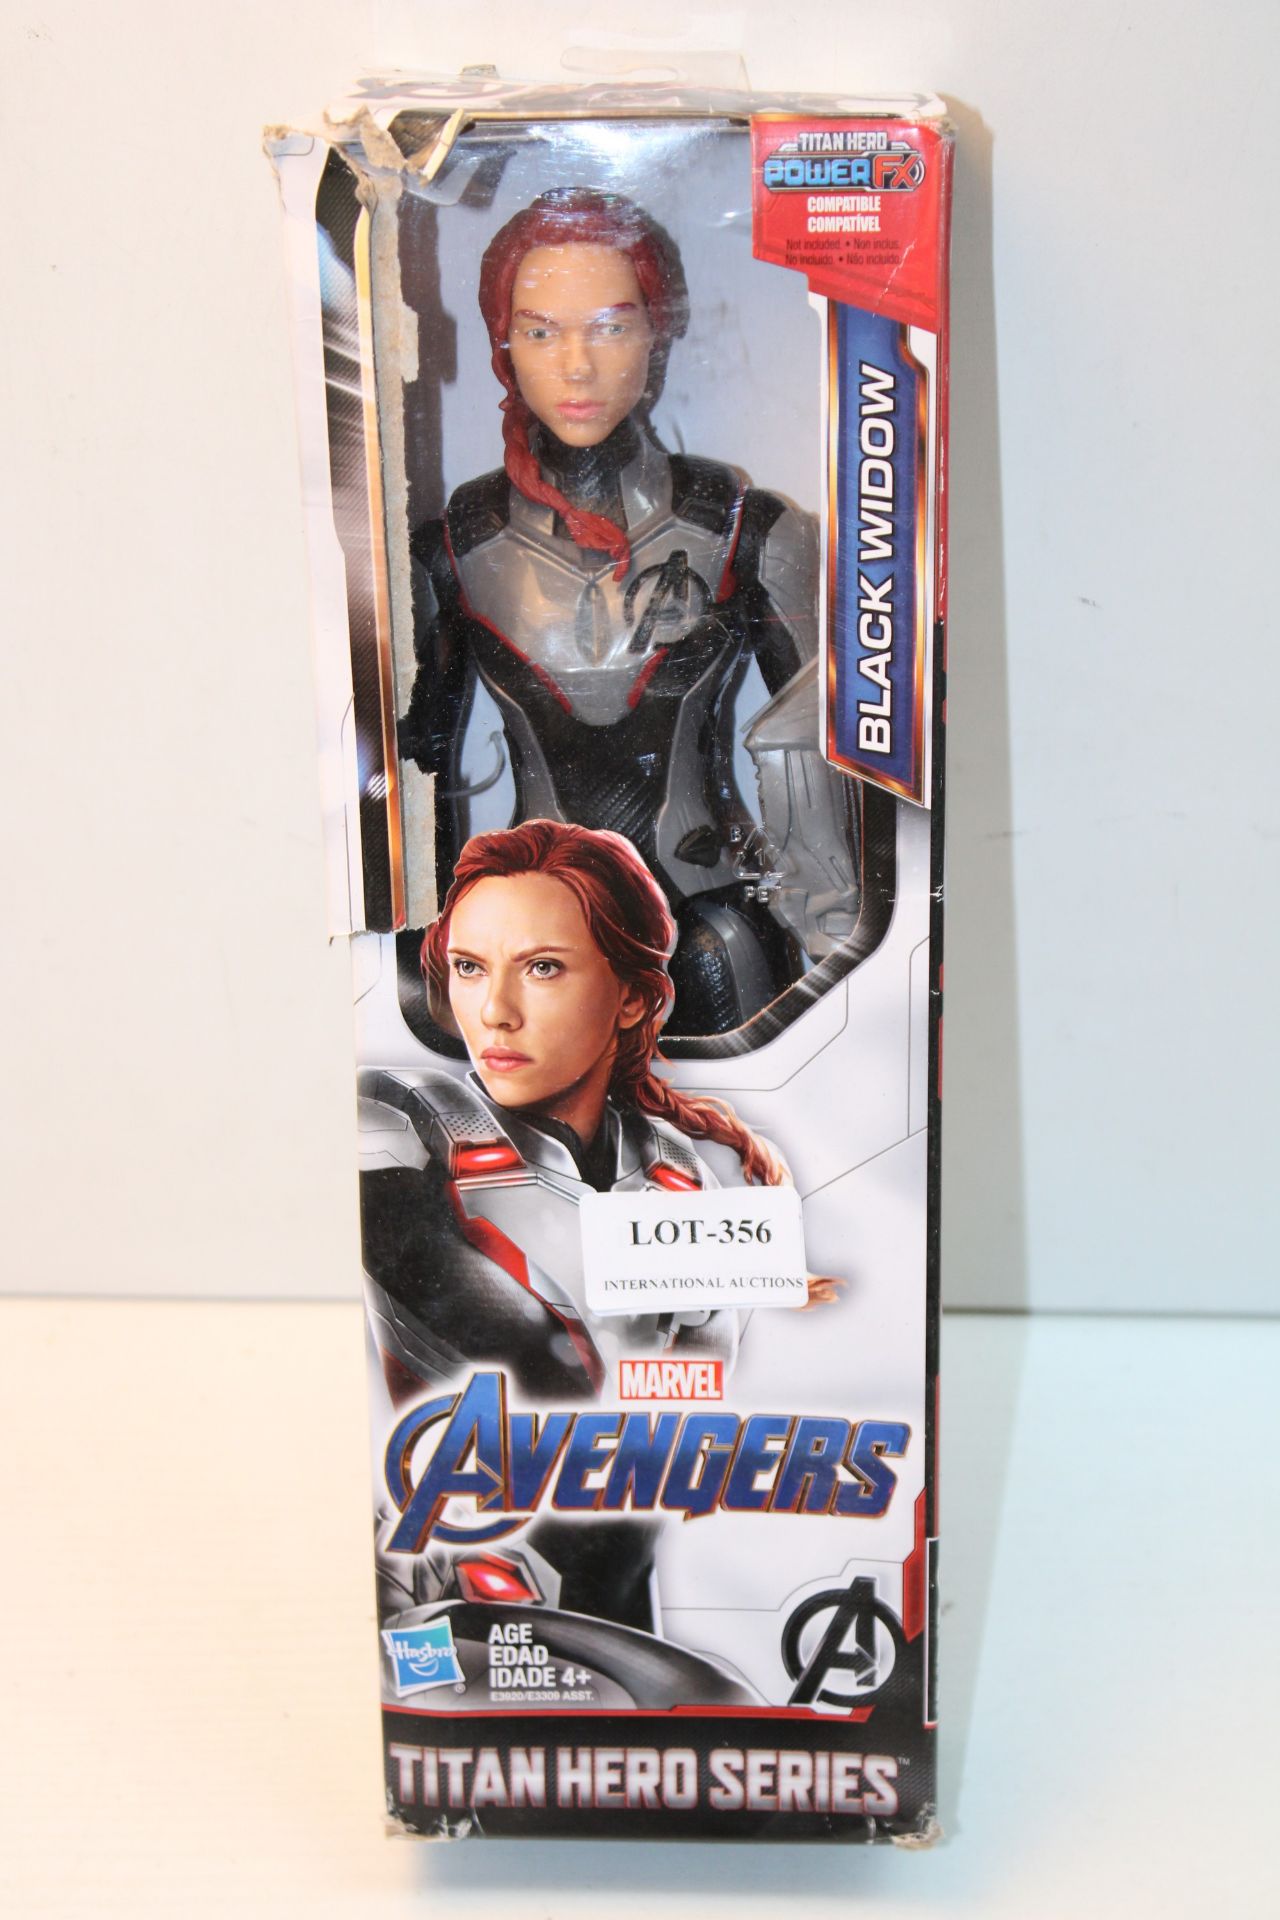 BOXED MARVEL AVENGERS TITAN HERO SERIES BLACK WIDOW Condition ReportAppraisal Available on